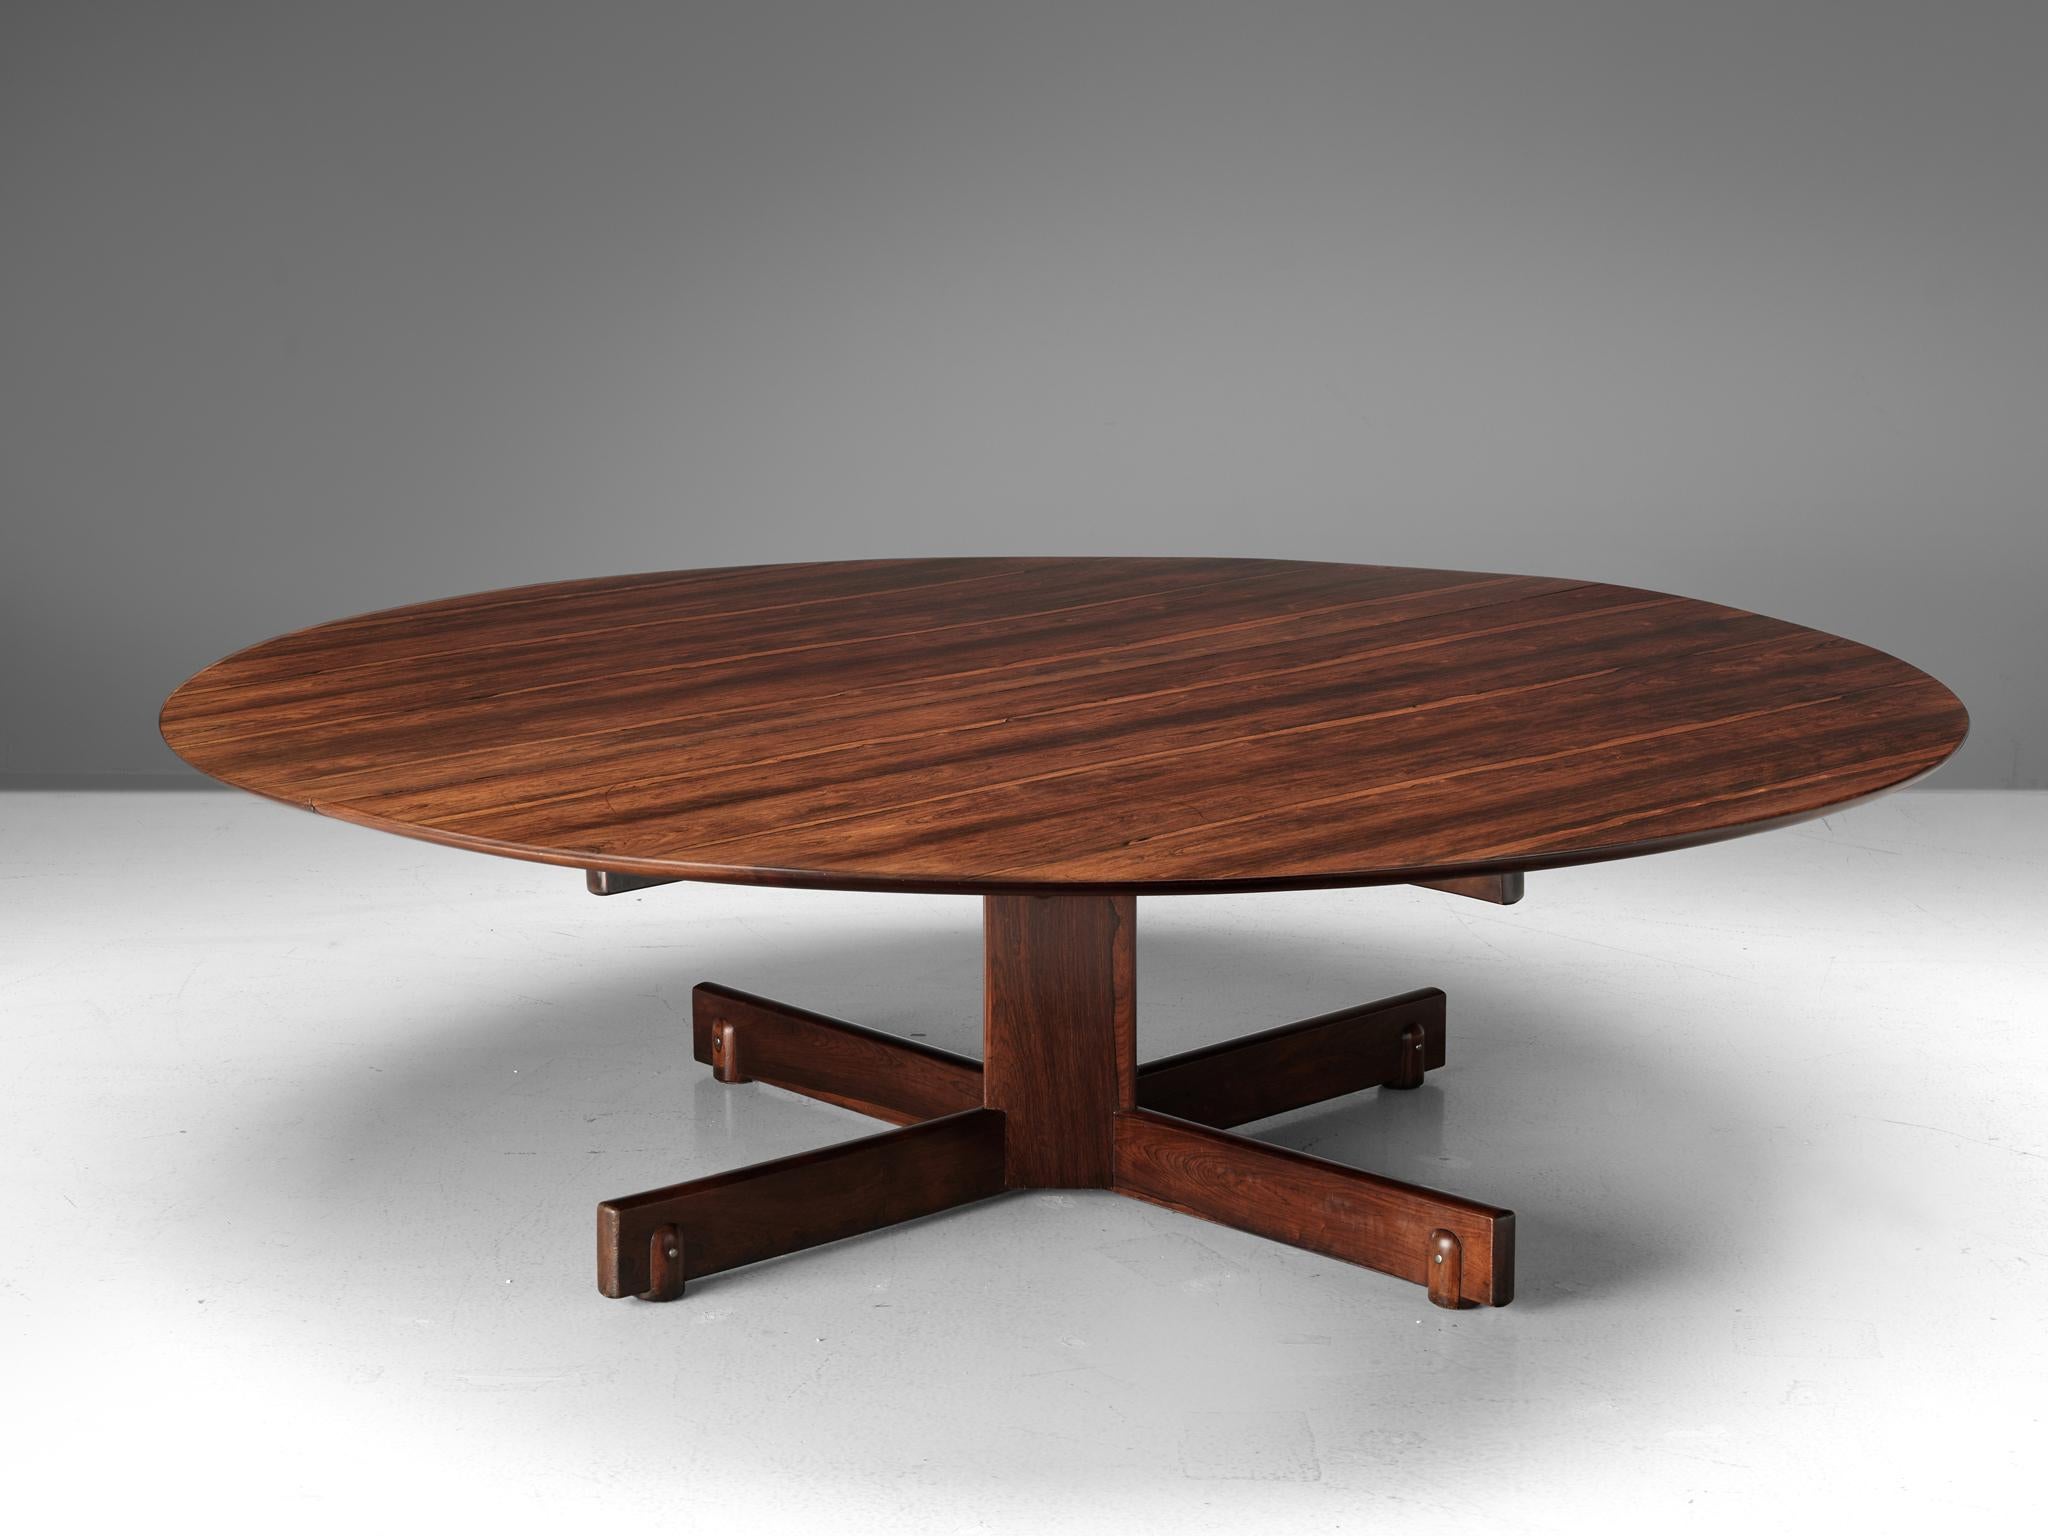 Sergio Rodrigues, large rosewood table, Brazil, 1950s

This grand dining table has been custom made for a private client in Rio de Janeiro. The table has been in made on request and therefore it is a unique design. The table with a diameter of 250